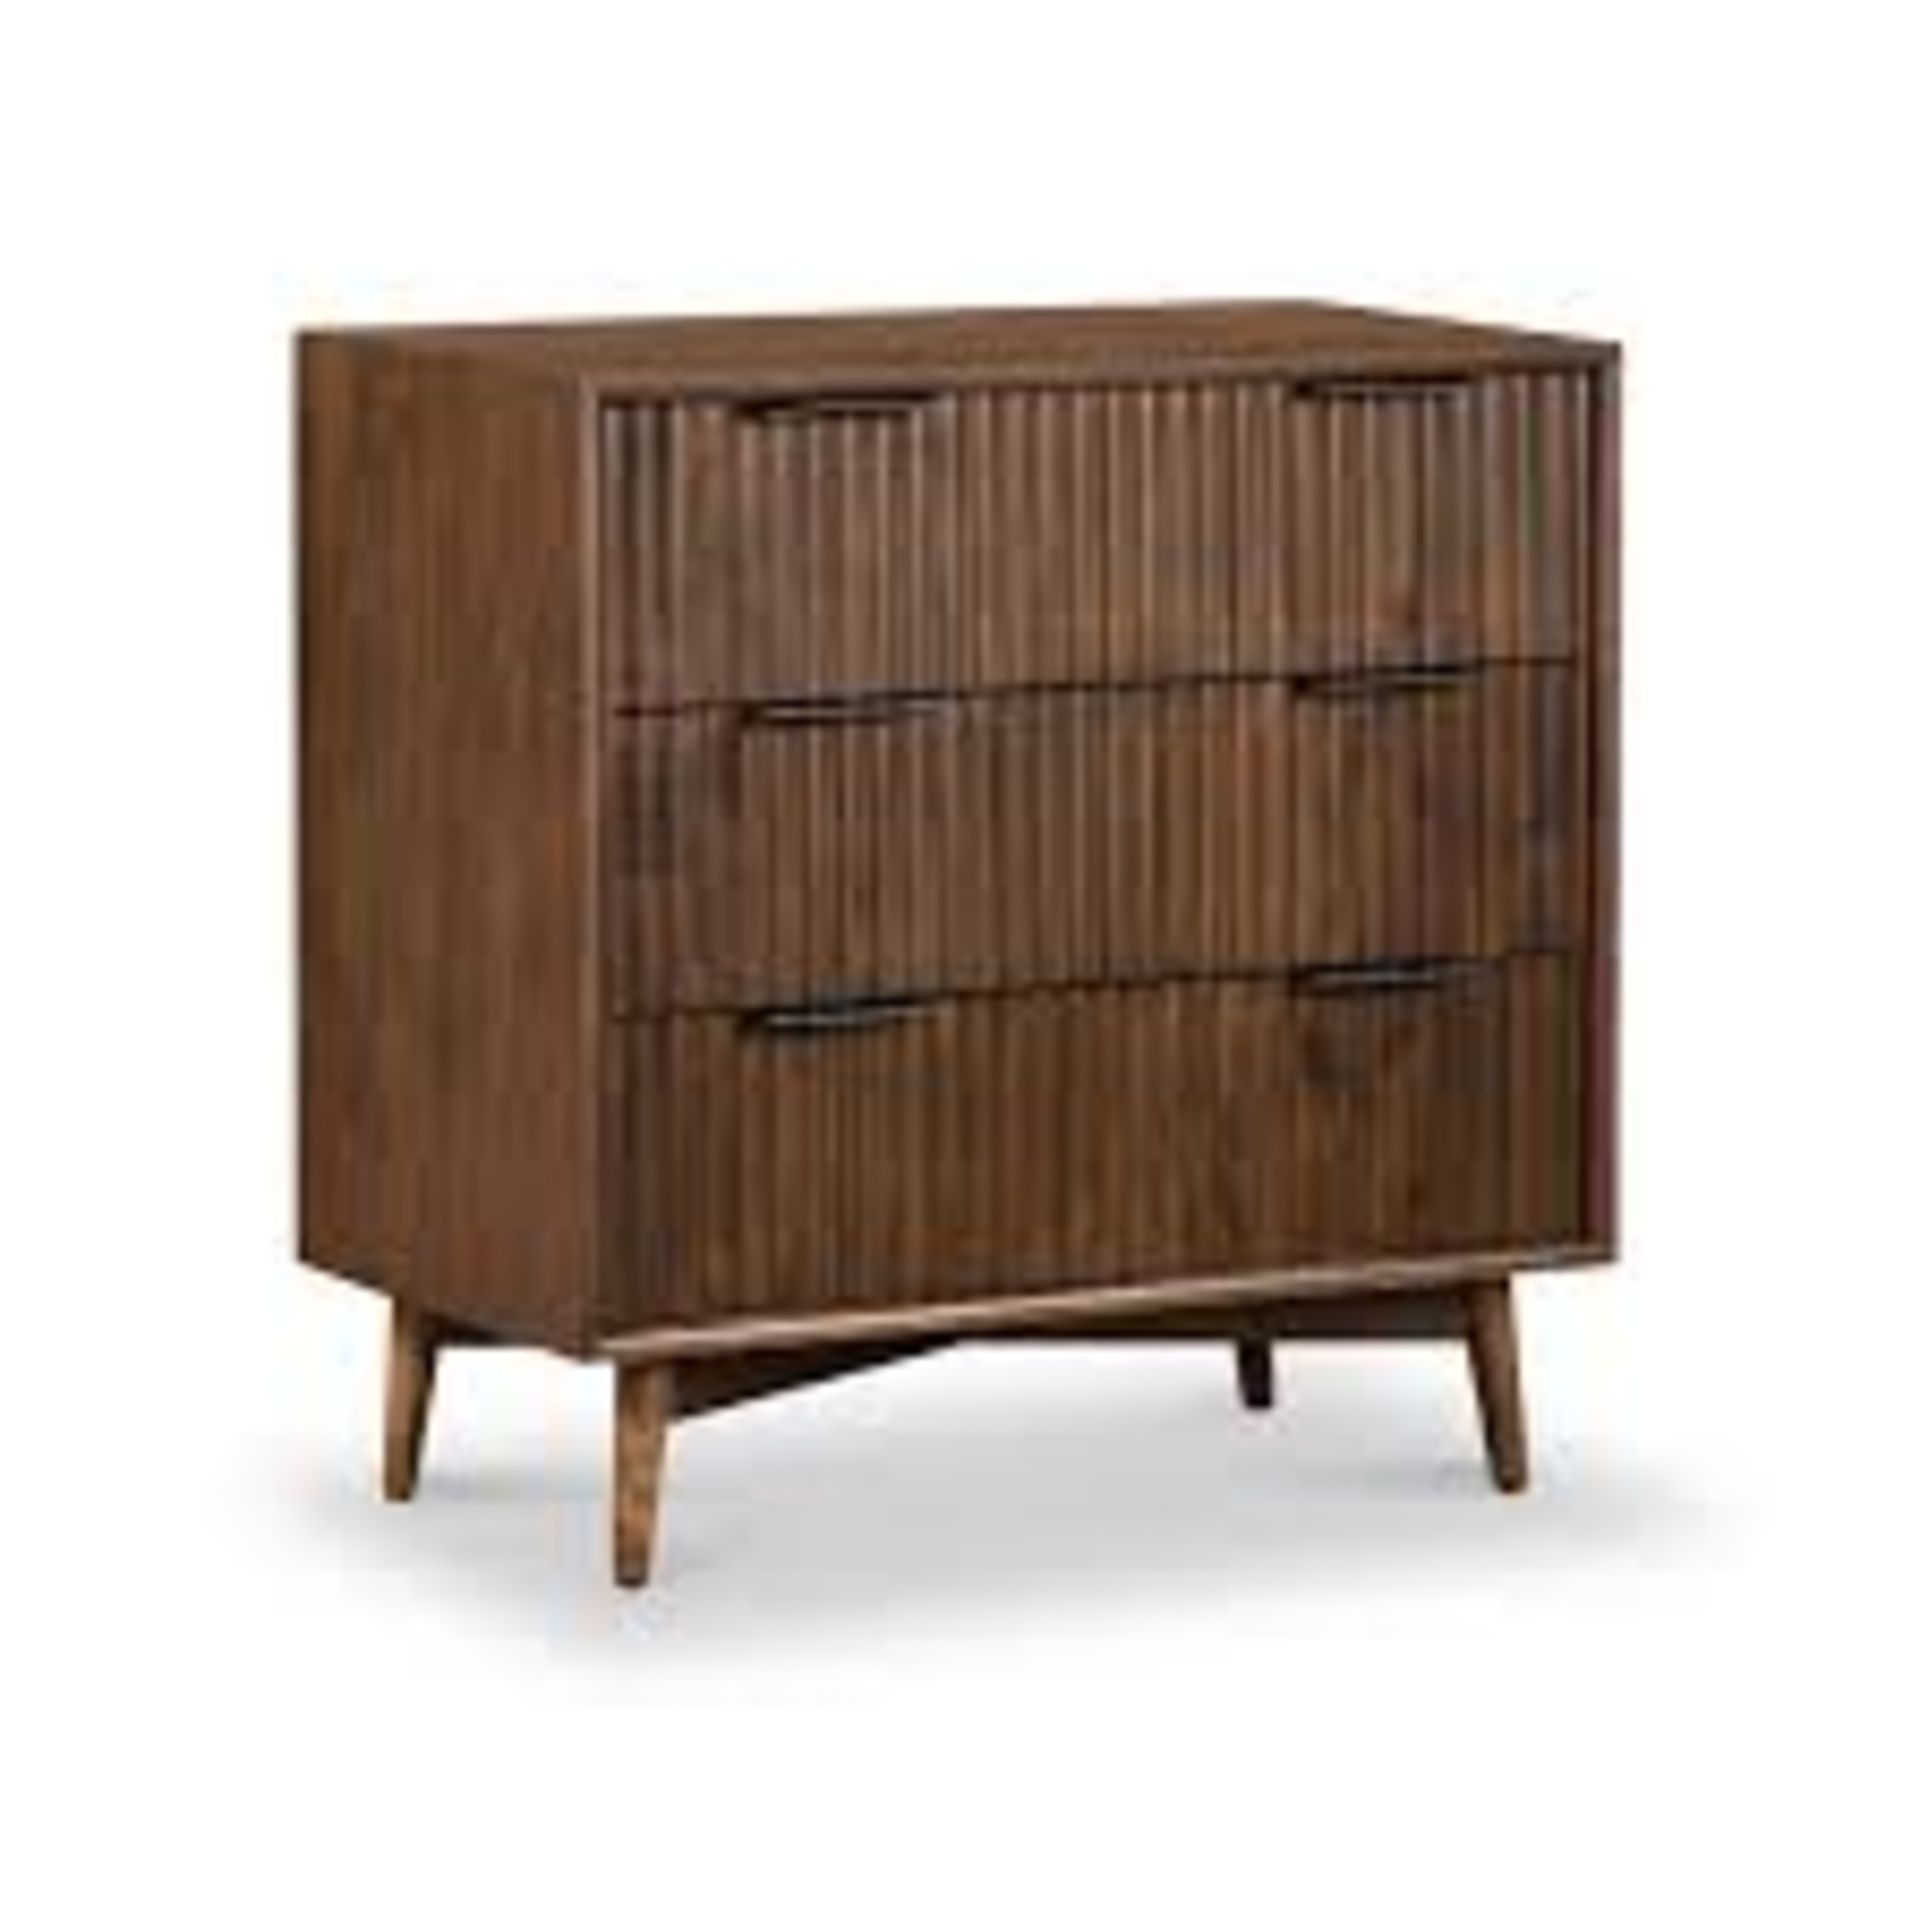 RRP £300 Boxed Solid Wood 3 Drawer Groove Handle Dresser, Walnut Finish(Cr1)